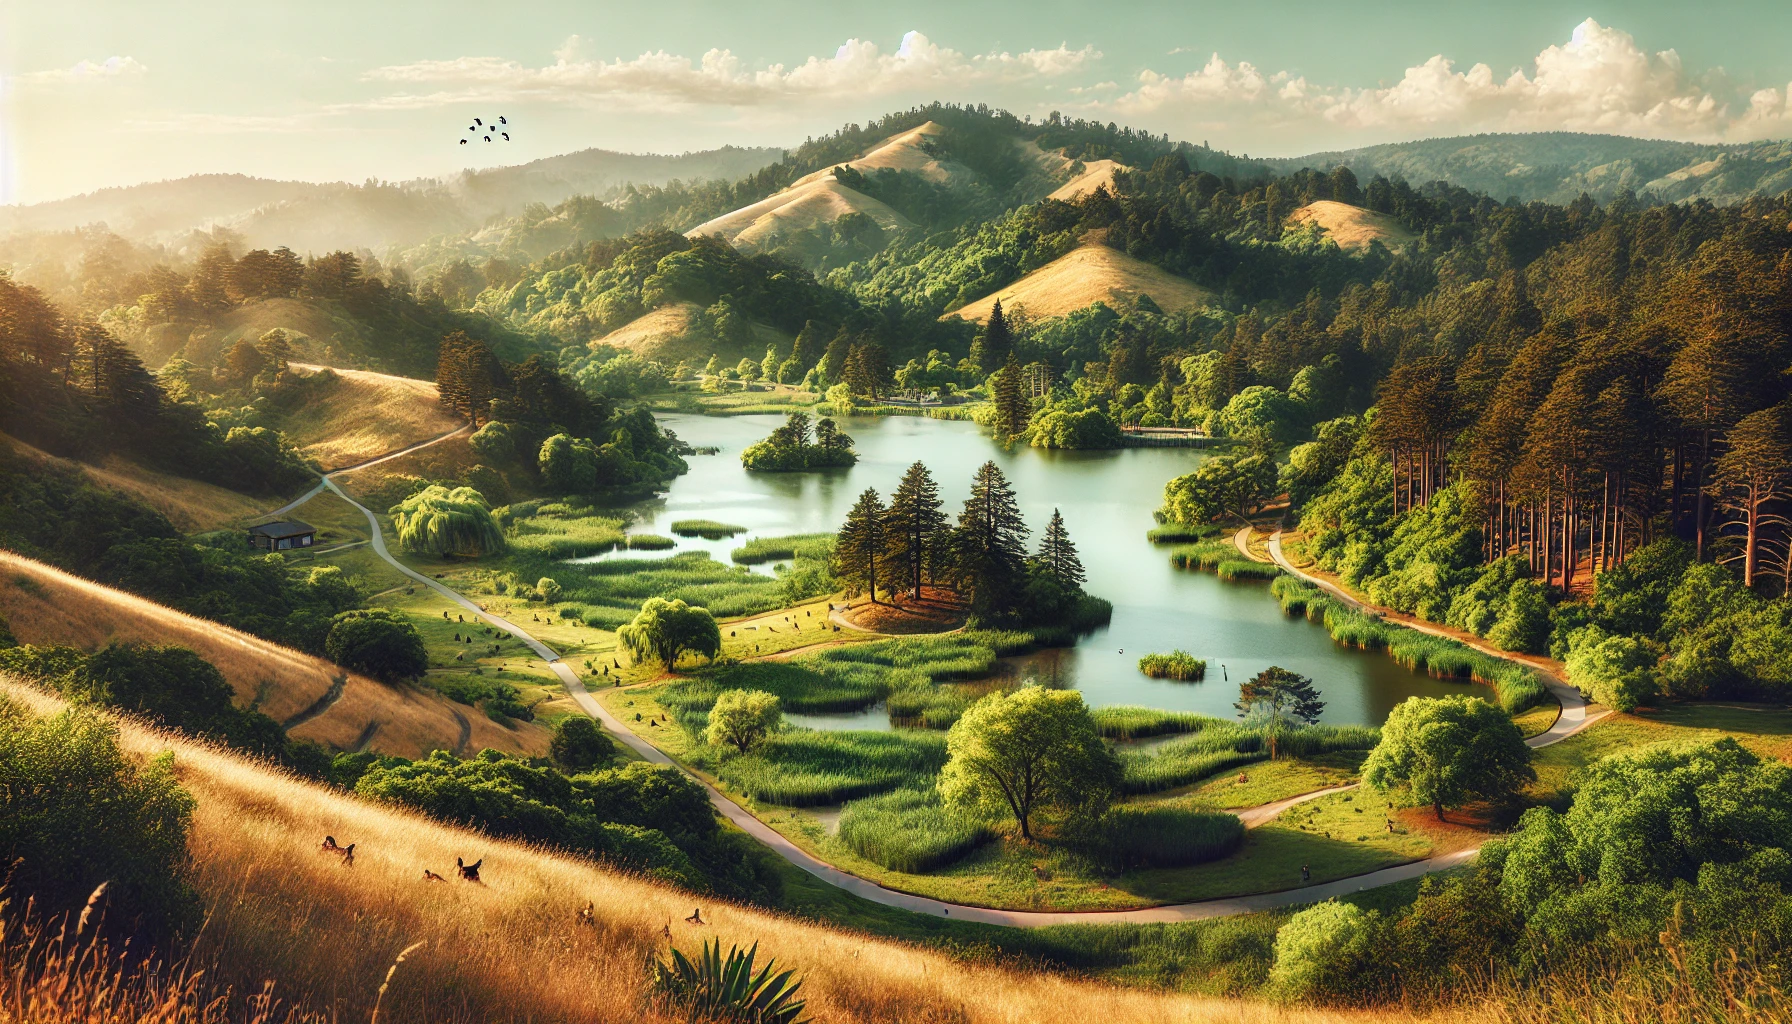 A widespread view of Tilden Nature Area in Berkeley, California, showcasing lush greenery, rolling hills, and a variety of wildlife such as deer, birds, and squirrels. The image includes well-maintained hiking trails, a serene lake, and a clear sky with scattered clouds and bright sunlight.